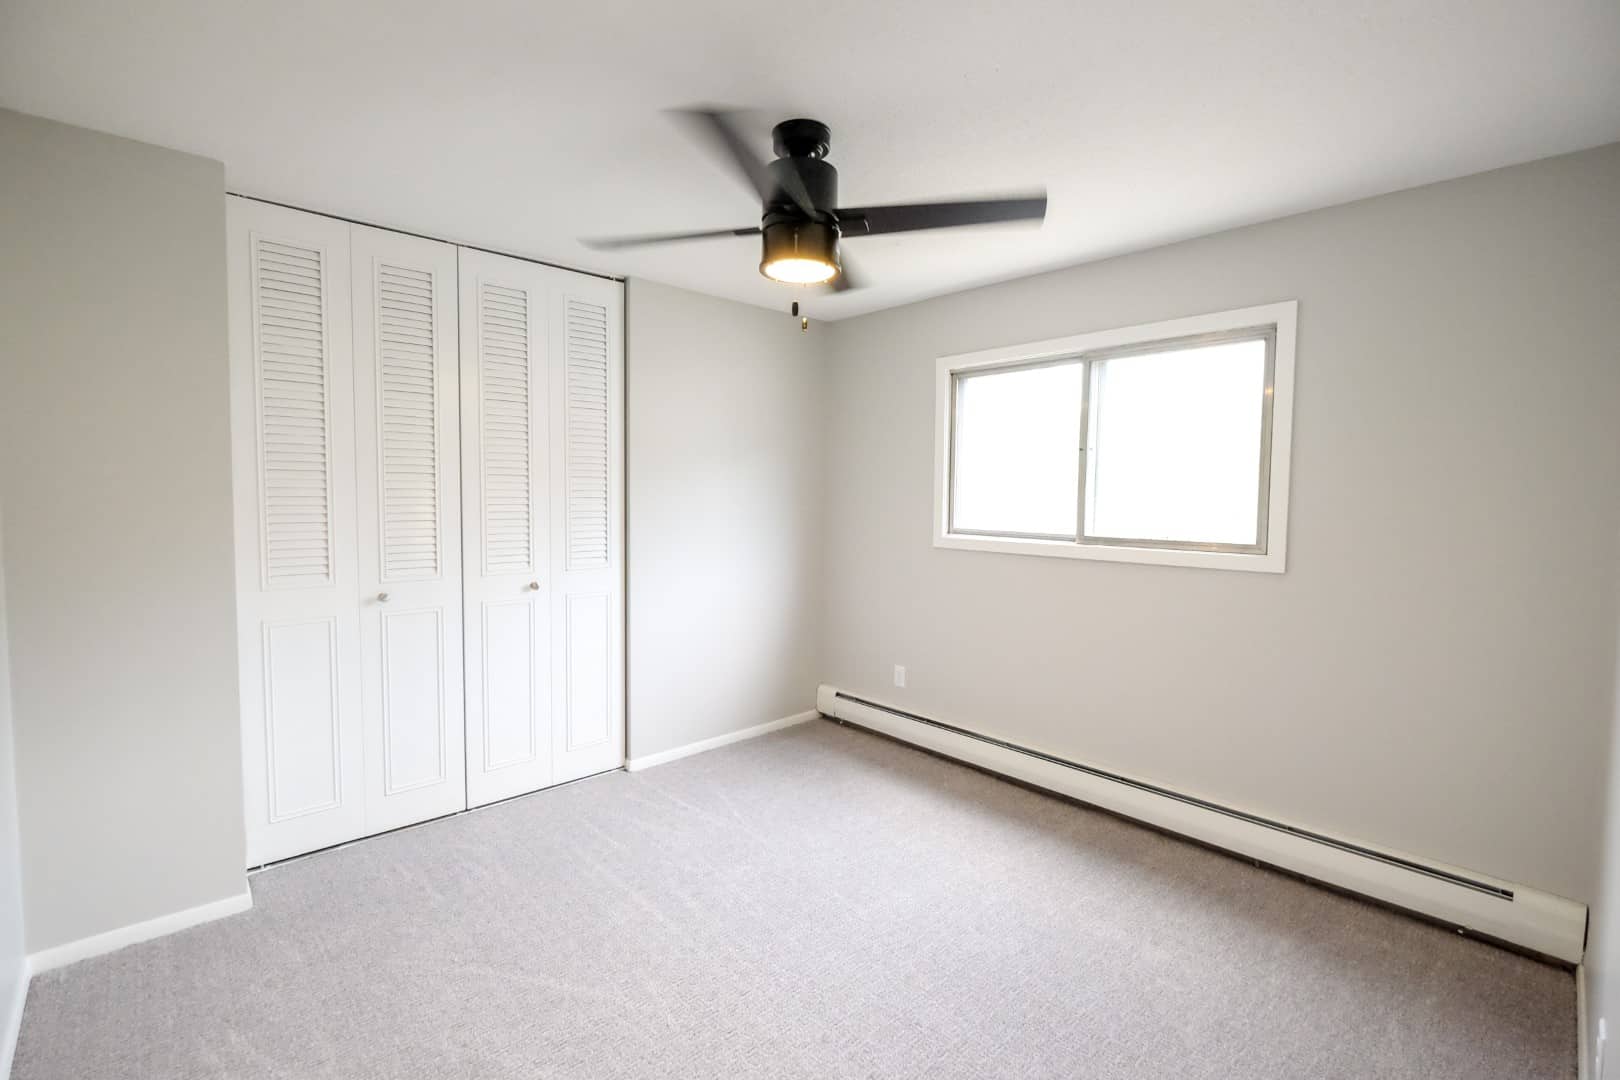 Bedrooms at The Concord are equipped with ceiling fans and air conditioning. 